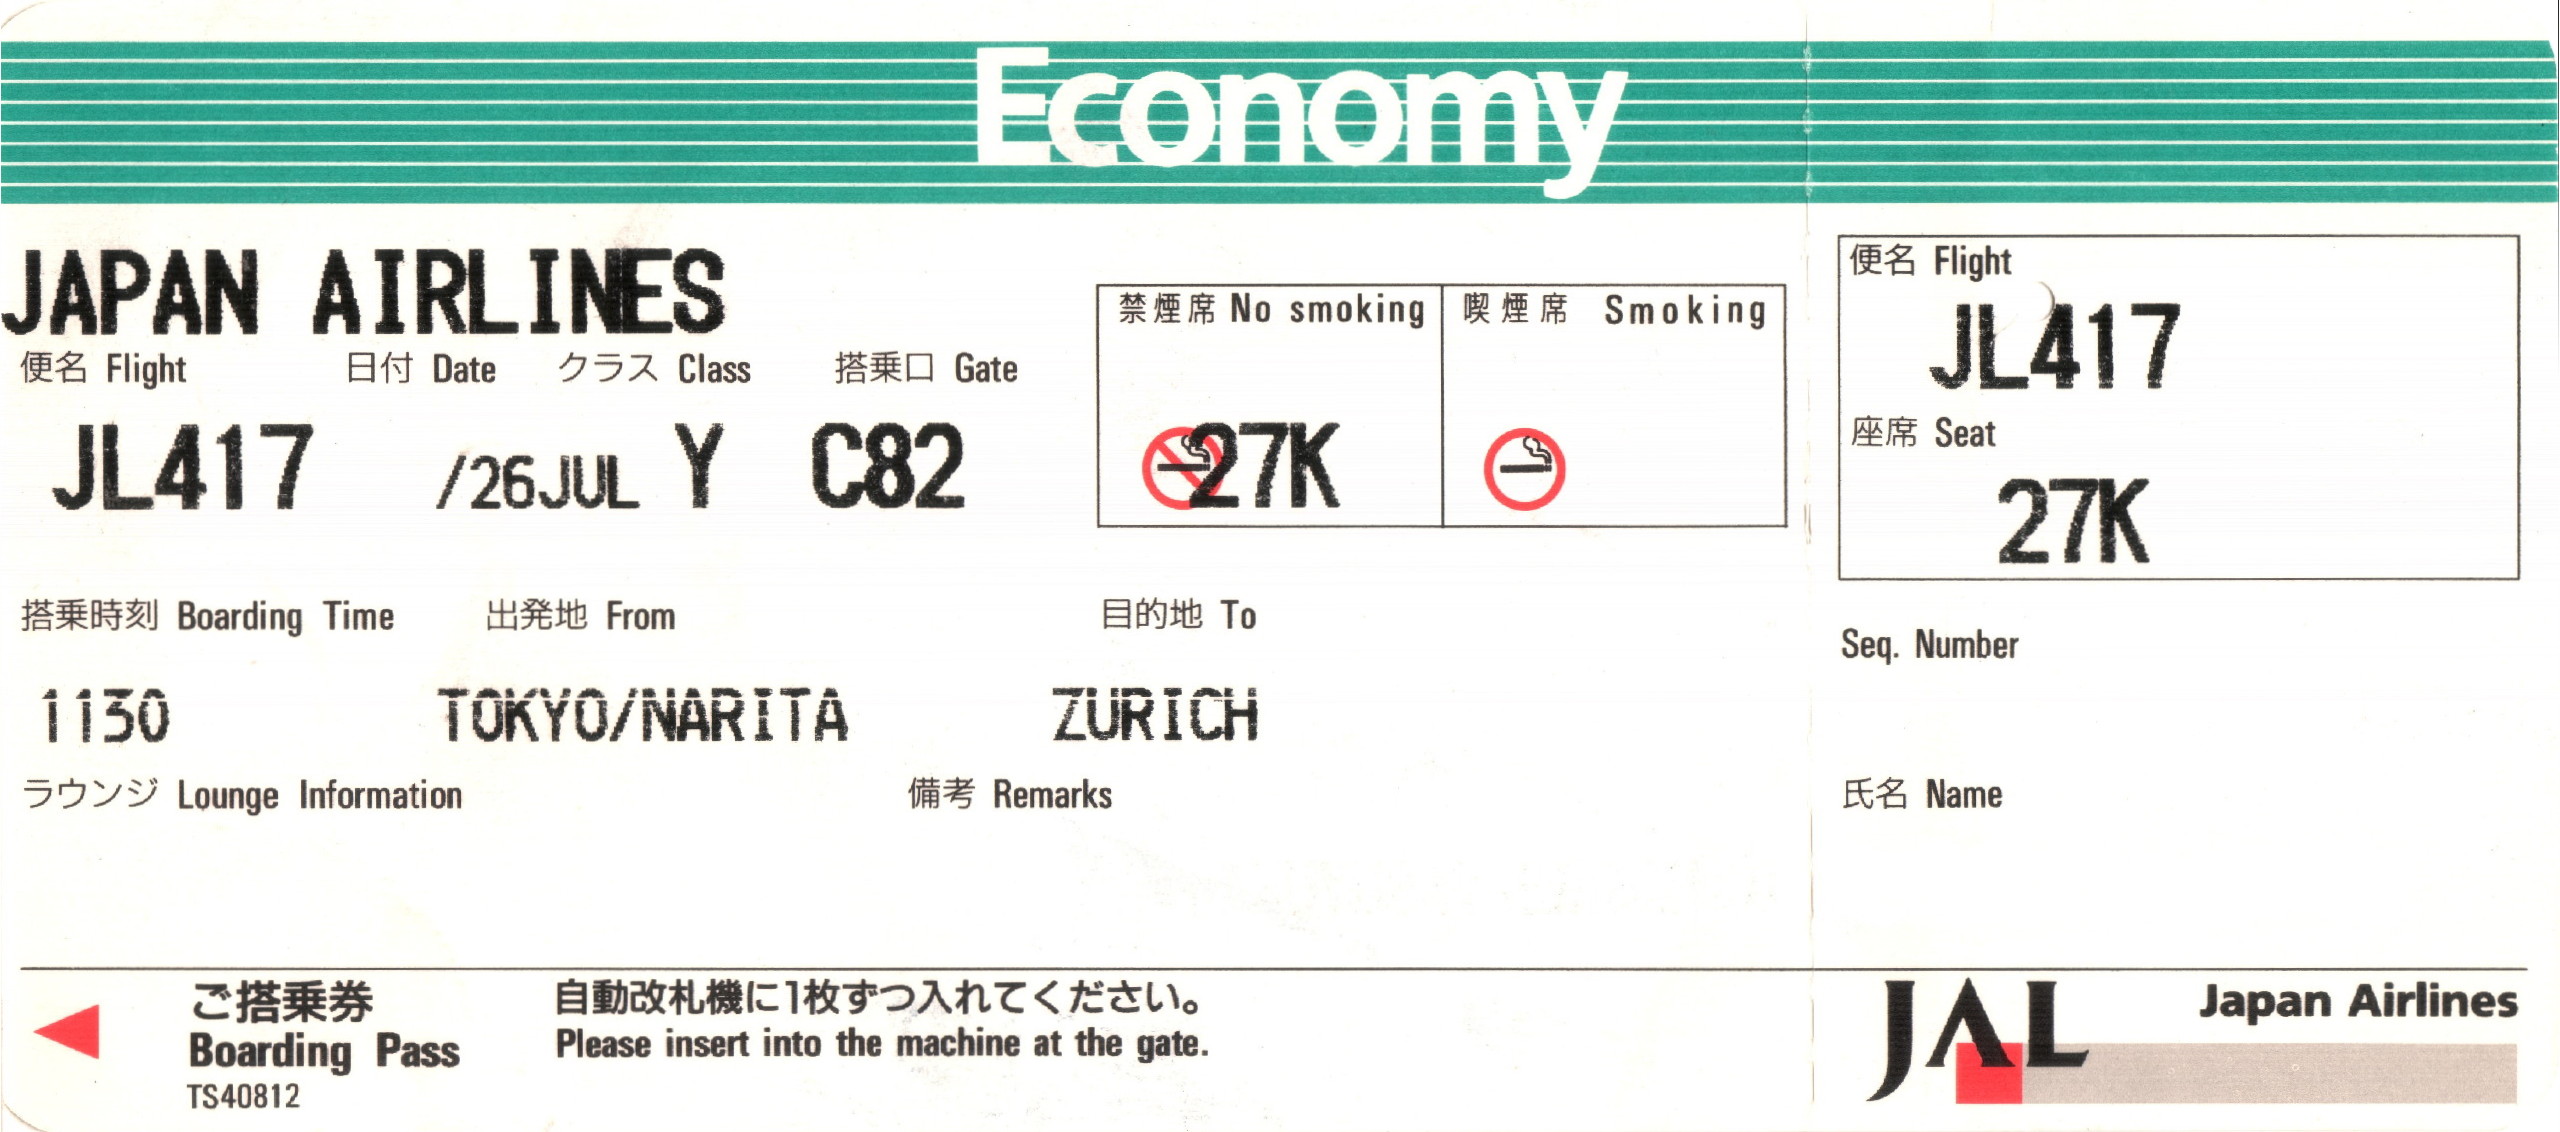 Japan Airlines boarding pass